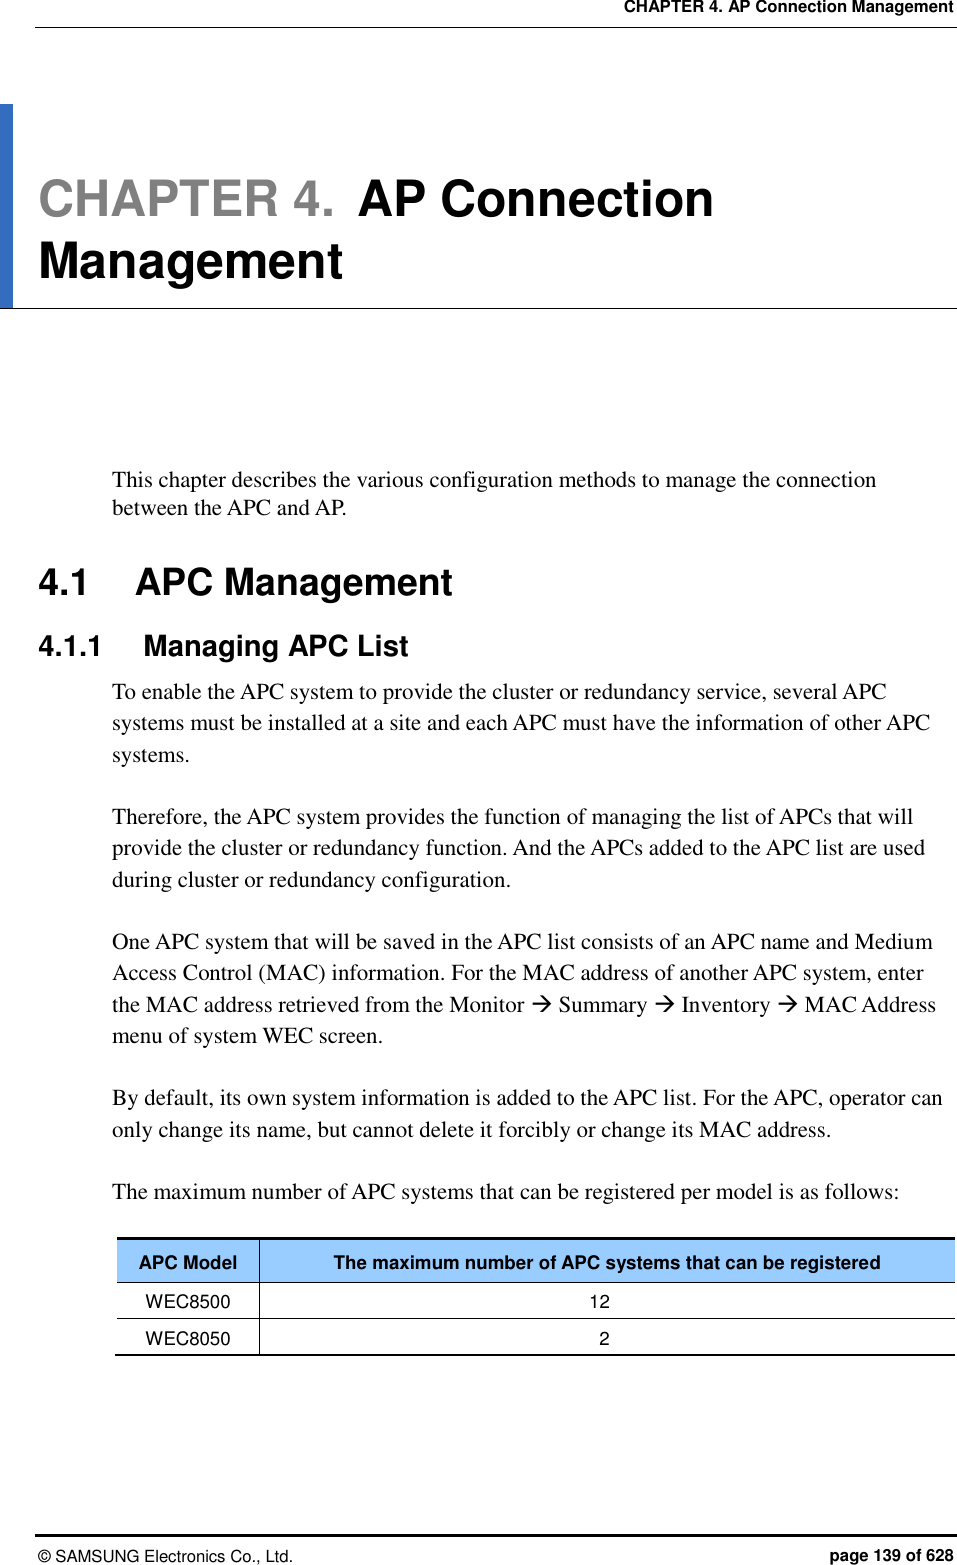 CHAPTER 4. AP Connection Management ©  SAMSUNG Electronics Co., Ltd.  page 139 of 628 CHAPTER 4. AP Connection Management      This chapter describes the various configuration methods to manage the connection between the APC and AP.  4.1  APC Management 4.1.1  Managing APC List   To enable the APC system to provide the cluster or redundancy service, several APC systems must be installed at a site and each APC must have the information of other APC systems.    Therefore, the APC system provides the function of managing the list of APCs that will provide the cluster or redundancy function. And the APCs added to the APC list are used during cluster or redundancy configuration.  One APC system that will be saved in the APC list consists of an APC name and Medium Access Control (MAC) information. For the MAC address of another APC system, enter the MAC address retrieved from the Monitor  Summary  Inventory  MAC Address menu of system WEC screen.    By default, its own system information is added to the APC list. For the APC, operator can only change its name, but cannot delete it forcibly or change its MAC address.  The maximum number of APC systems that can be registered per model is as follows:  APC Model The maximum number of APC systems that can be registered WEC8500 12 WEC8050 2  